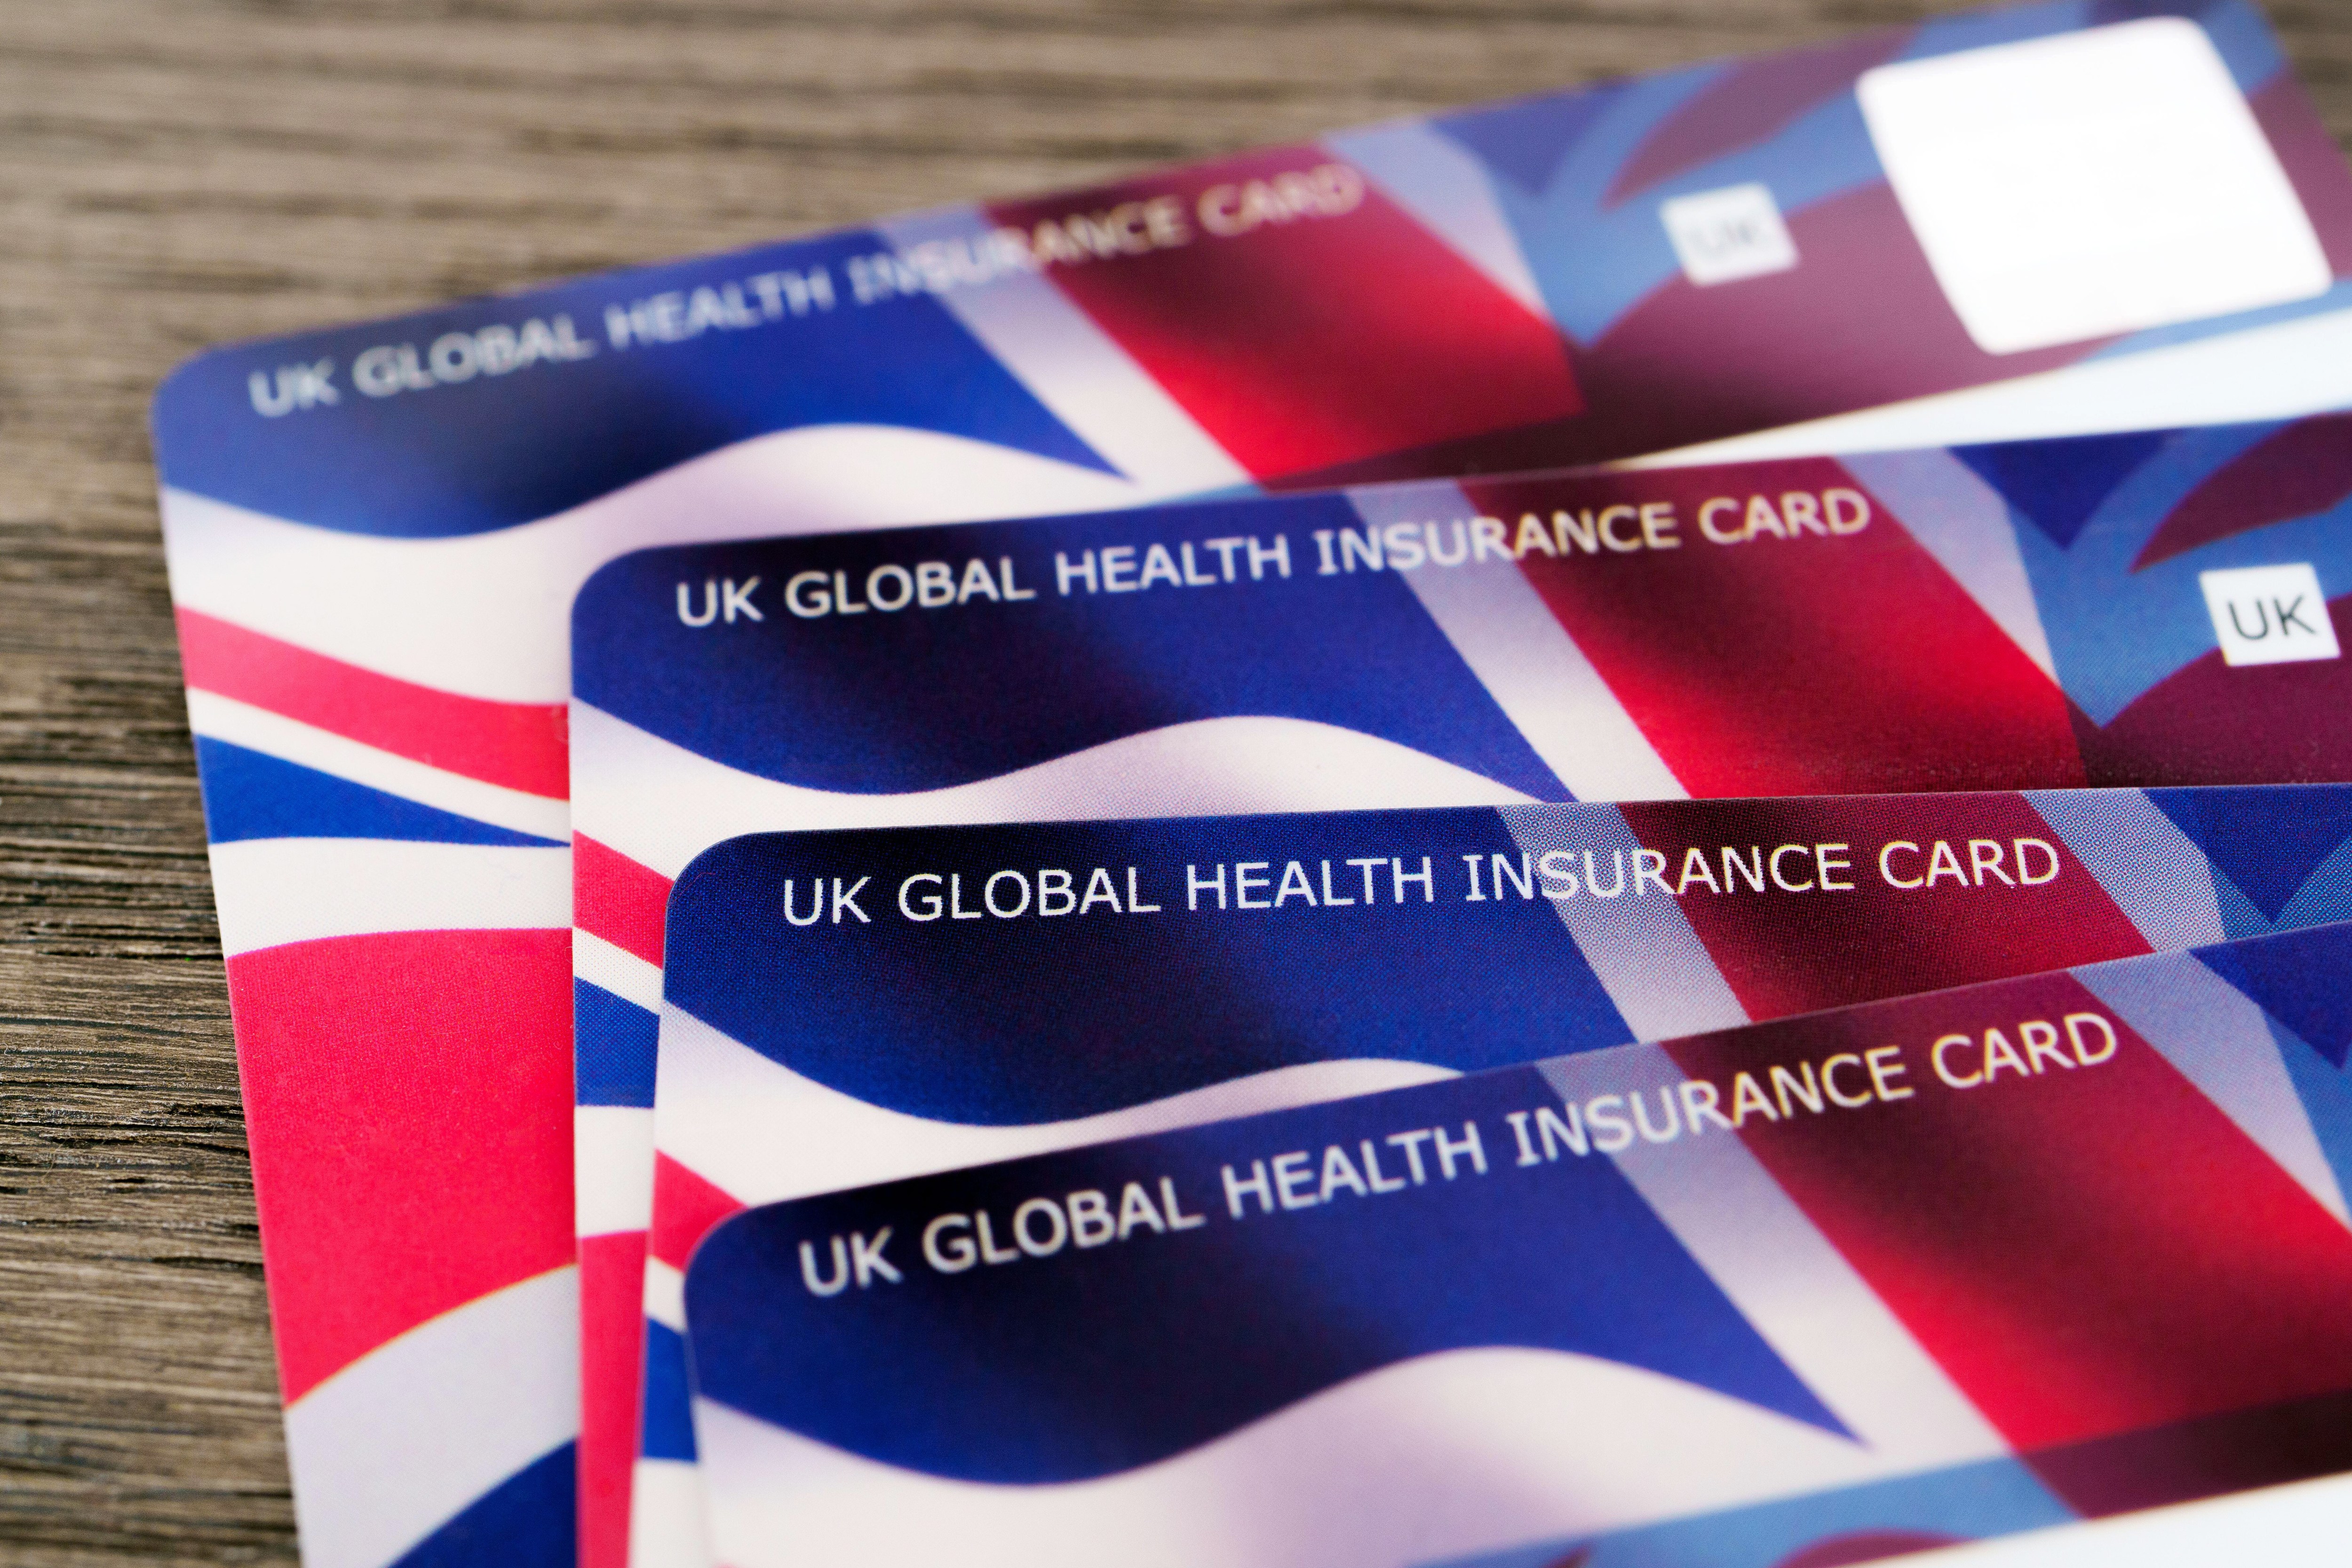 The UK Global Health Insurance Card is free from the official NHS site